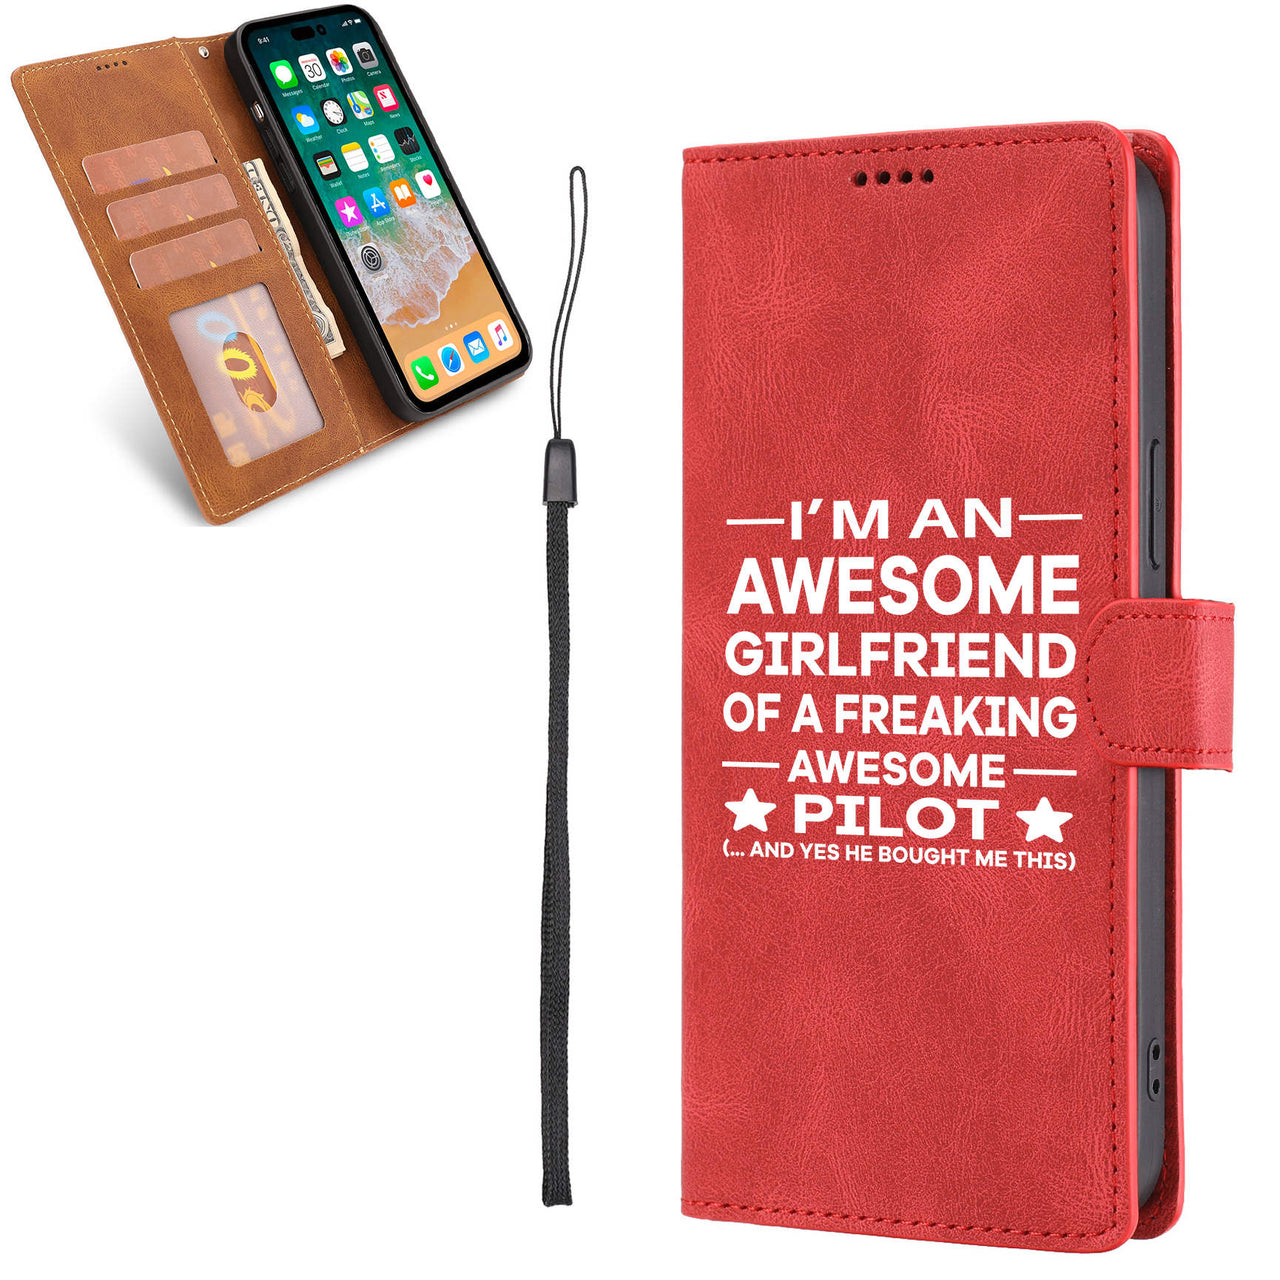 I am an Awesome Girlfriend Designed Leather iPhone Cases